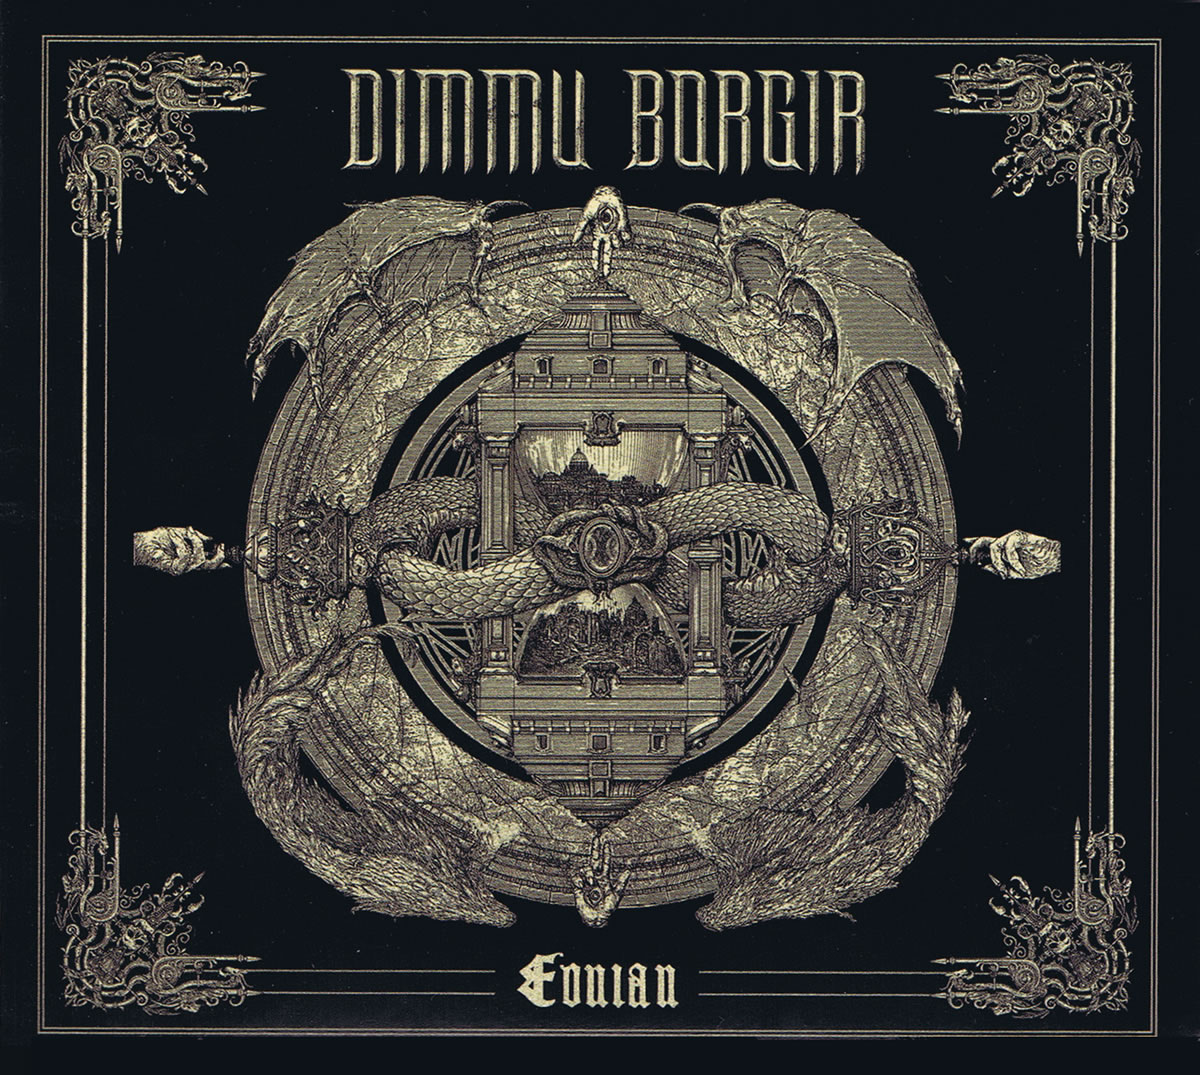 Read more about the article Dimmu Borgir – Eonian